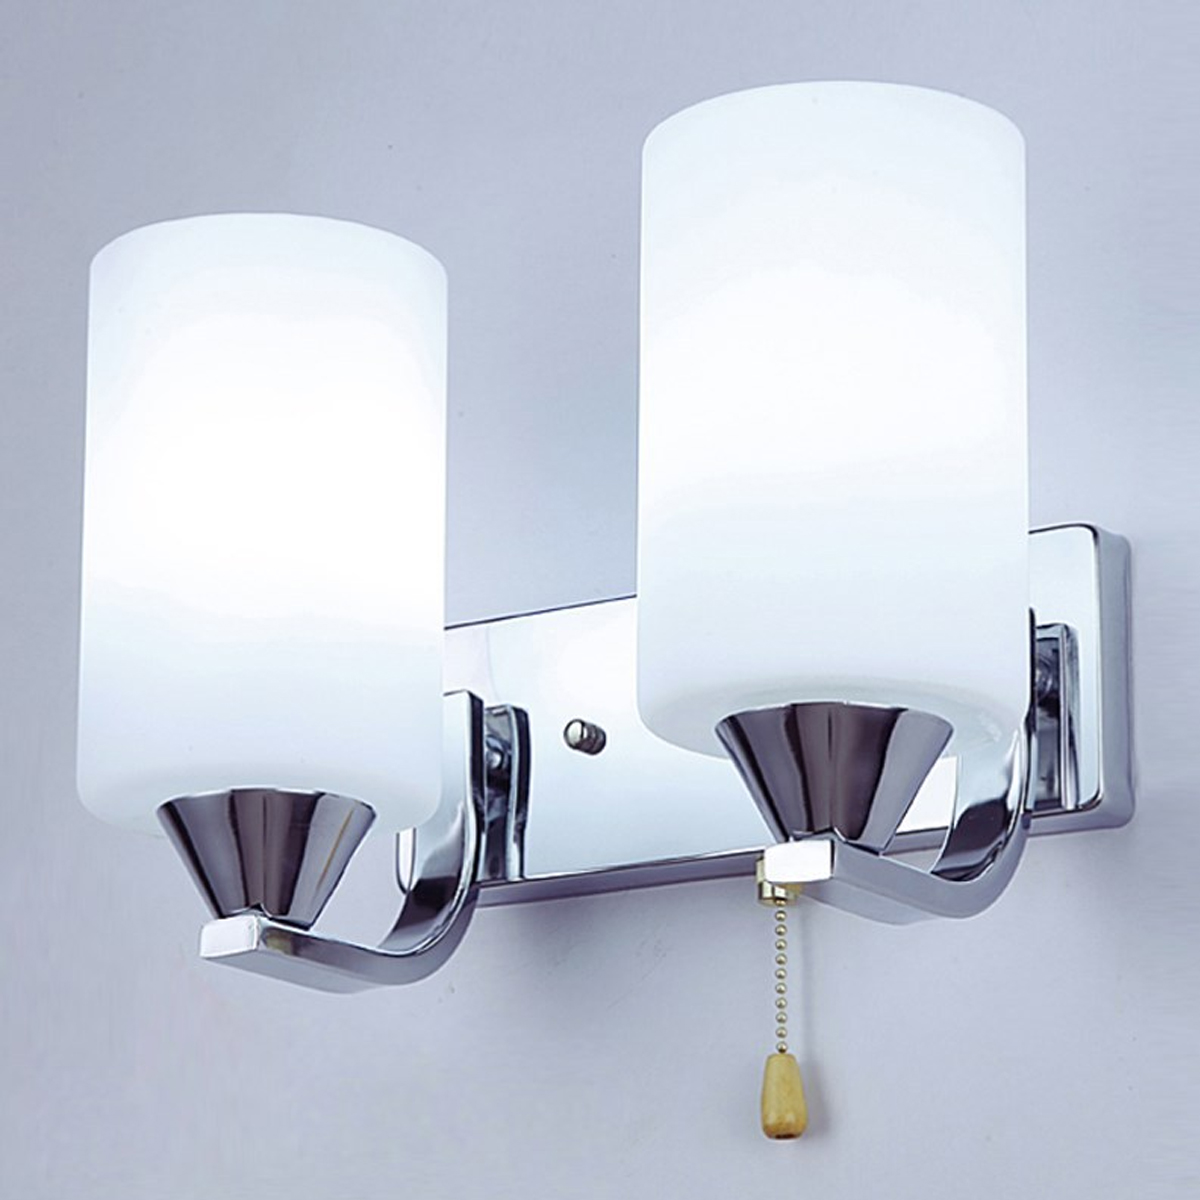 Bedroom-Glass-Wall-Sconce-Light-Indoor-Fixture-Bedside-LampLED-Bulb-Pull-Switch-1763737-7